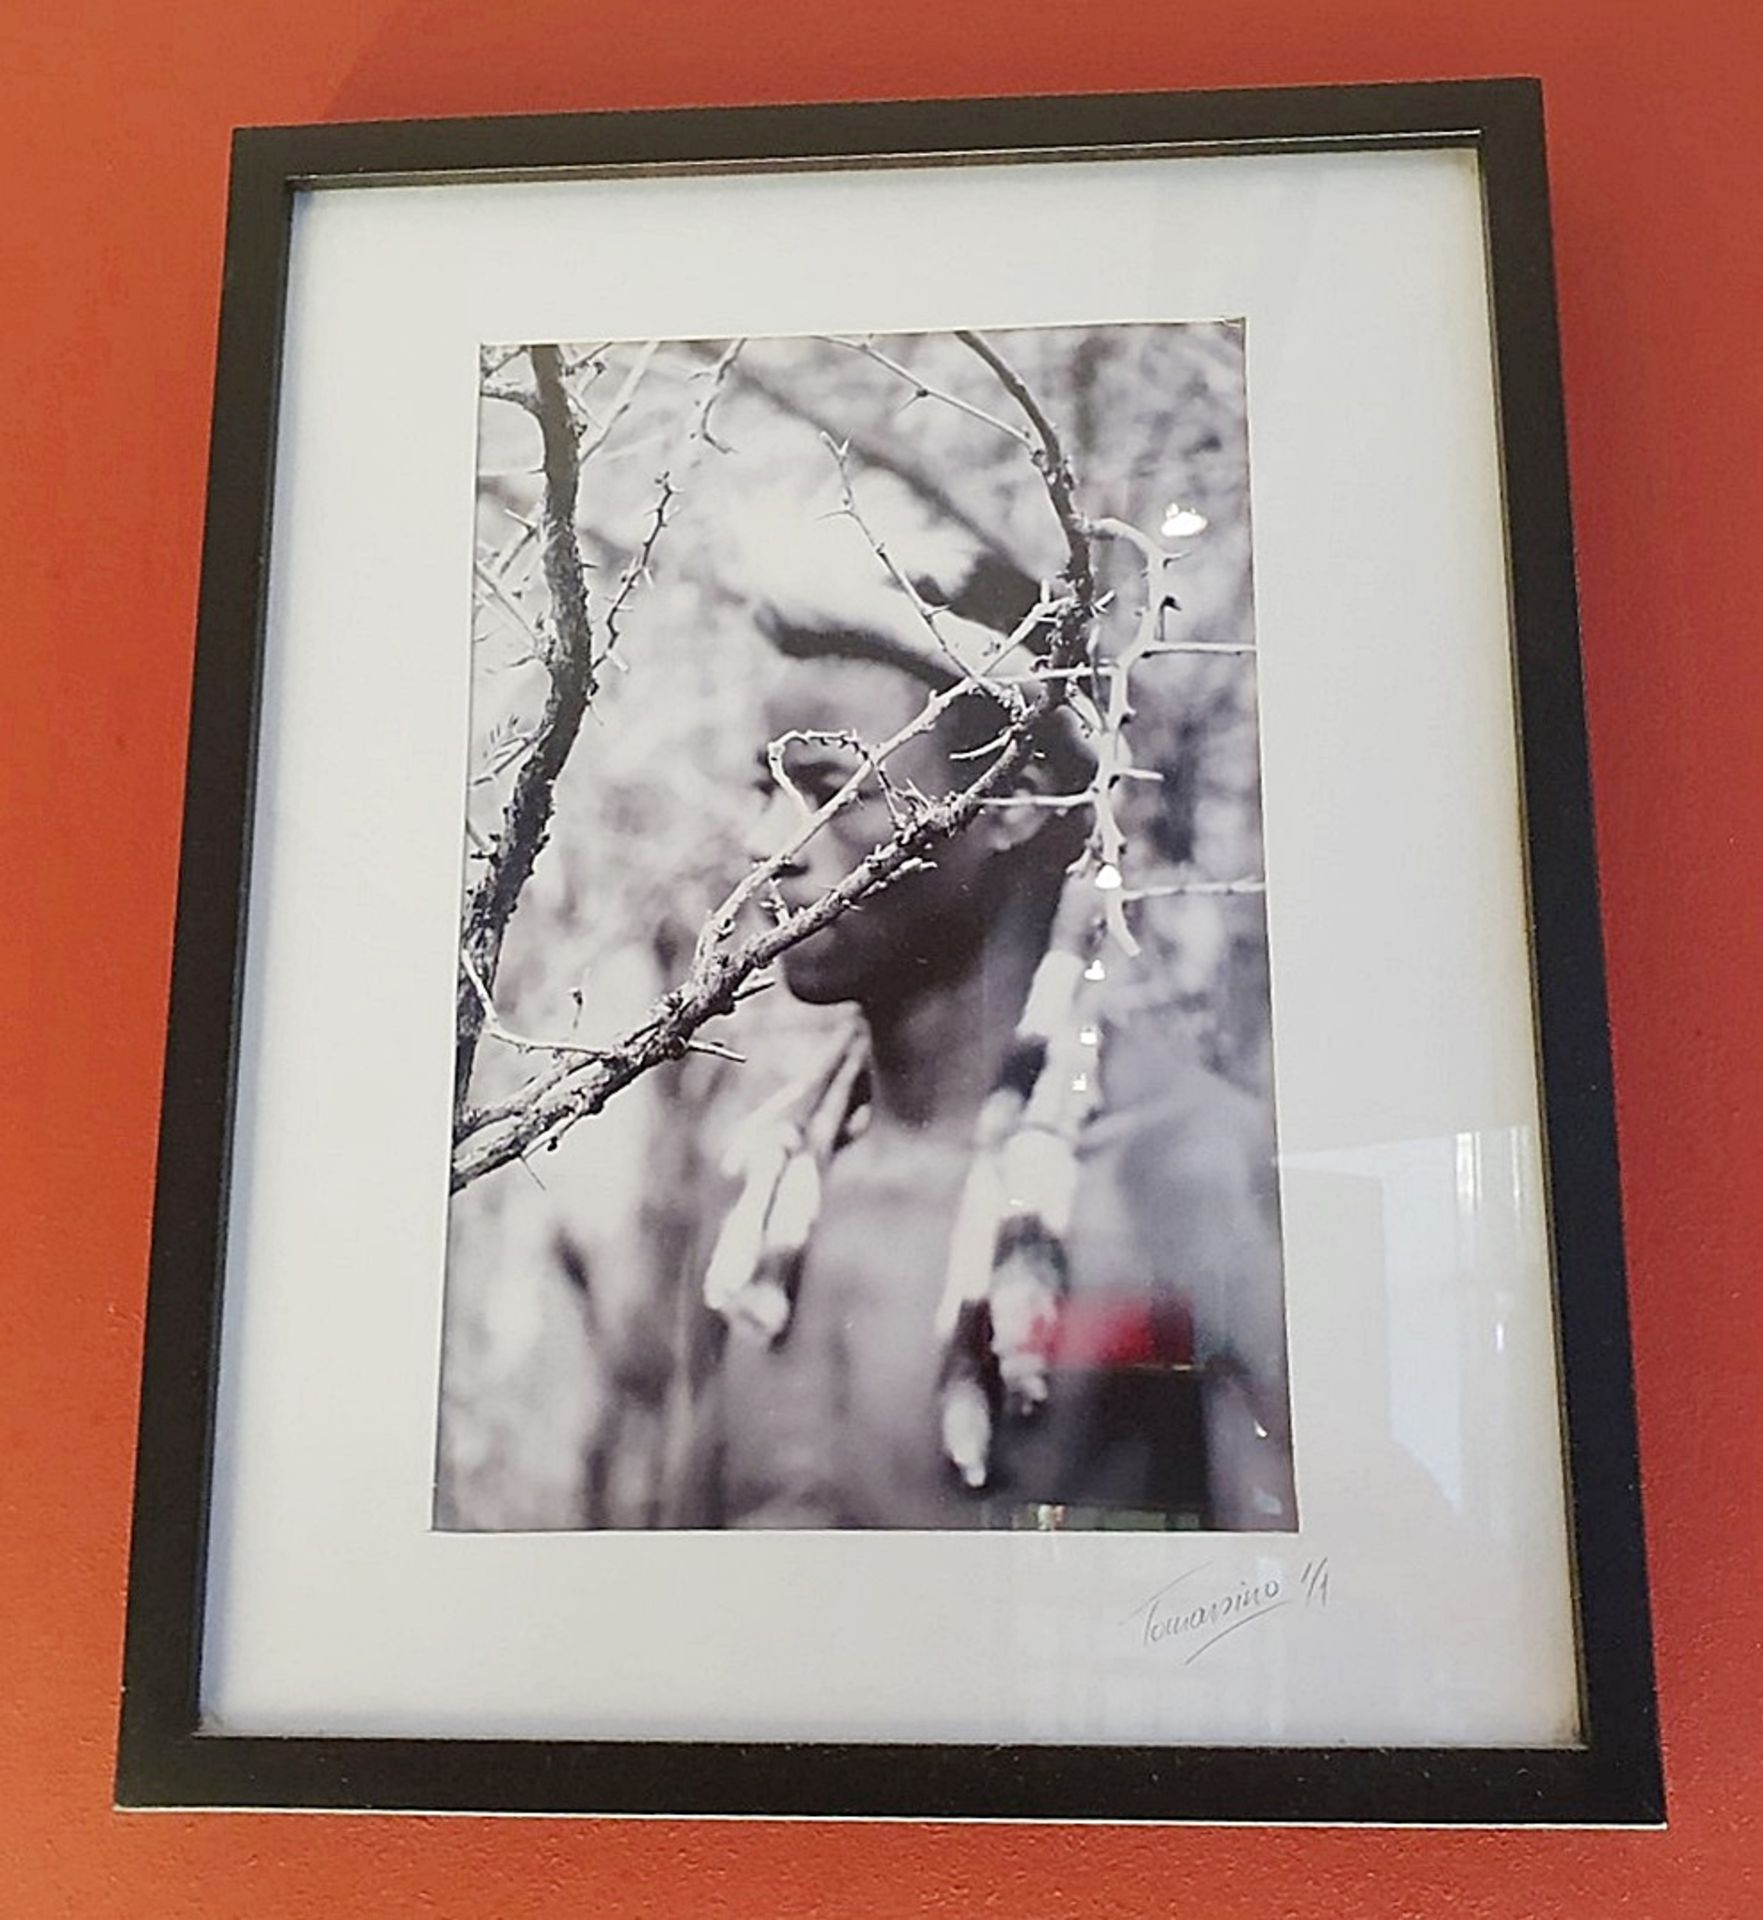 1 x Signed & Numbered Framed Photograph of A Tribesman - Dimensions: 43 x 53cm - Ref: BRE003